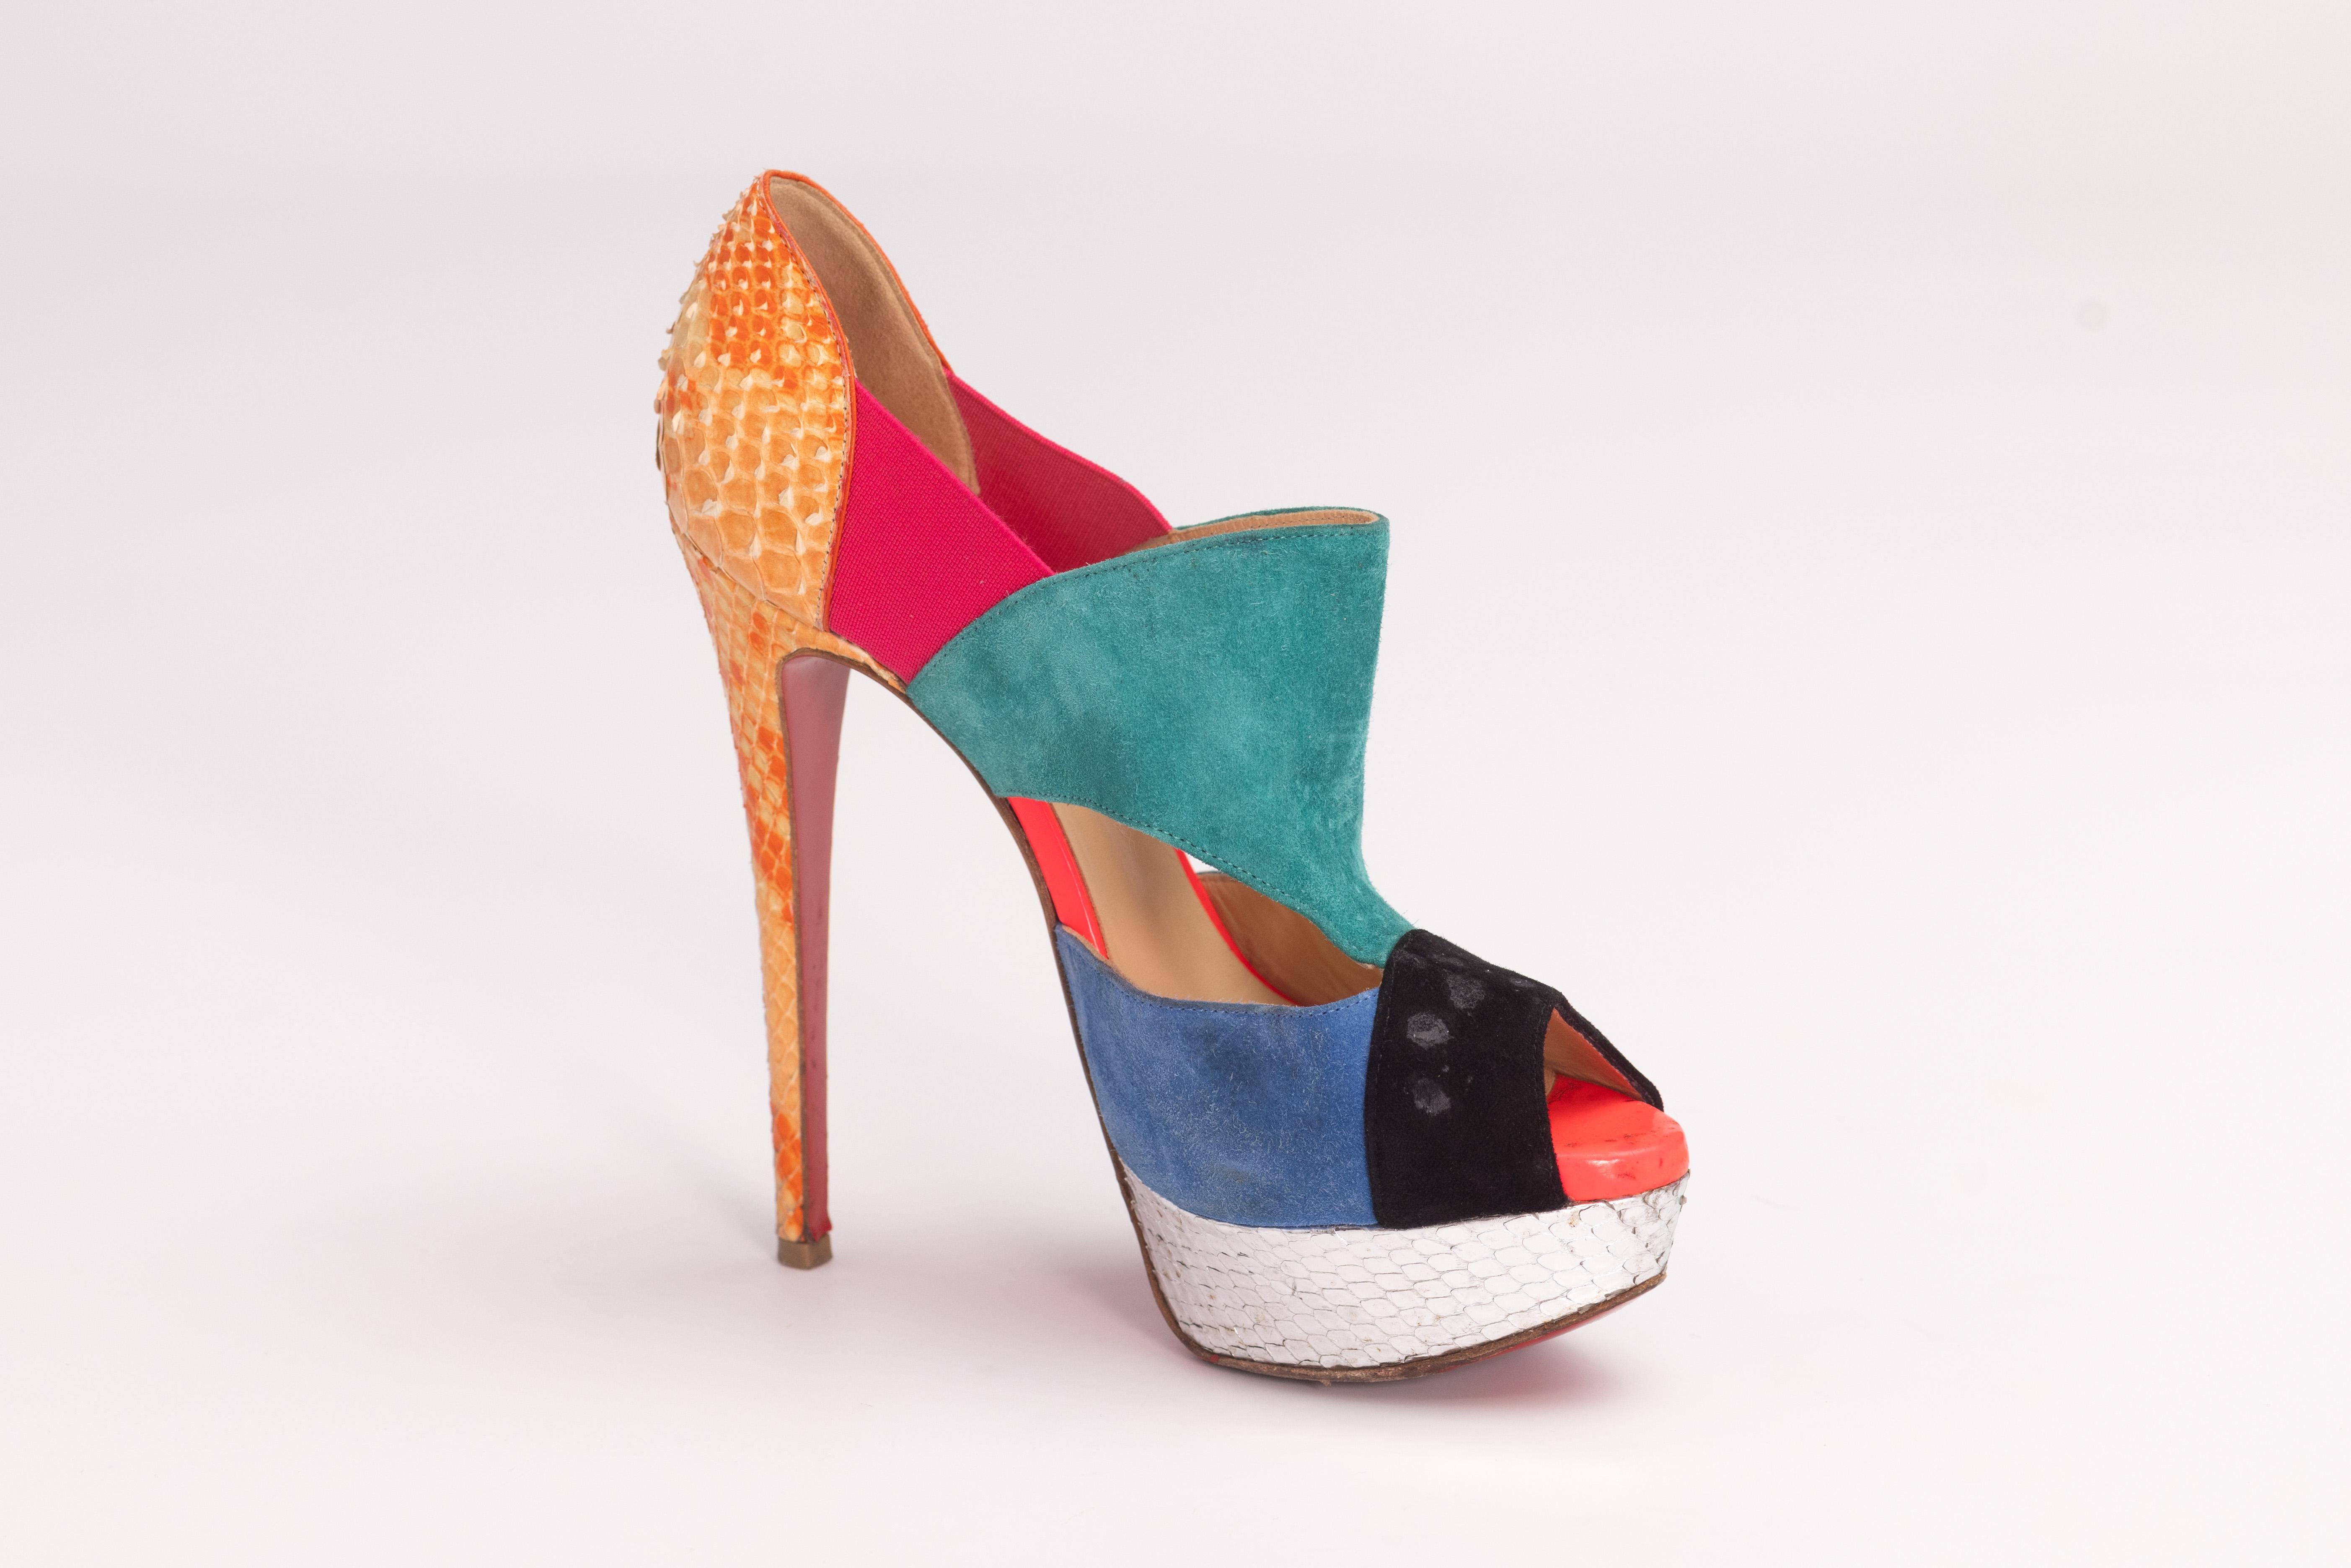 CHRISTIAN LOUBOUTIN MULTICOLOR SUEDE & PYTHON CUT OUT PLATFORM HEELS (EU 36)

Color: Multicoloured. Orange, pink, blue, turquoise. 
Material: Suede and Python Leather
Size: 36 EU
Heel Height: 1.4 mm / 5.5”
Platform Height: 25 mm / 1” 
Condition: